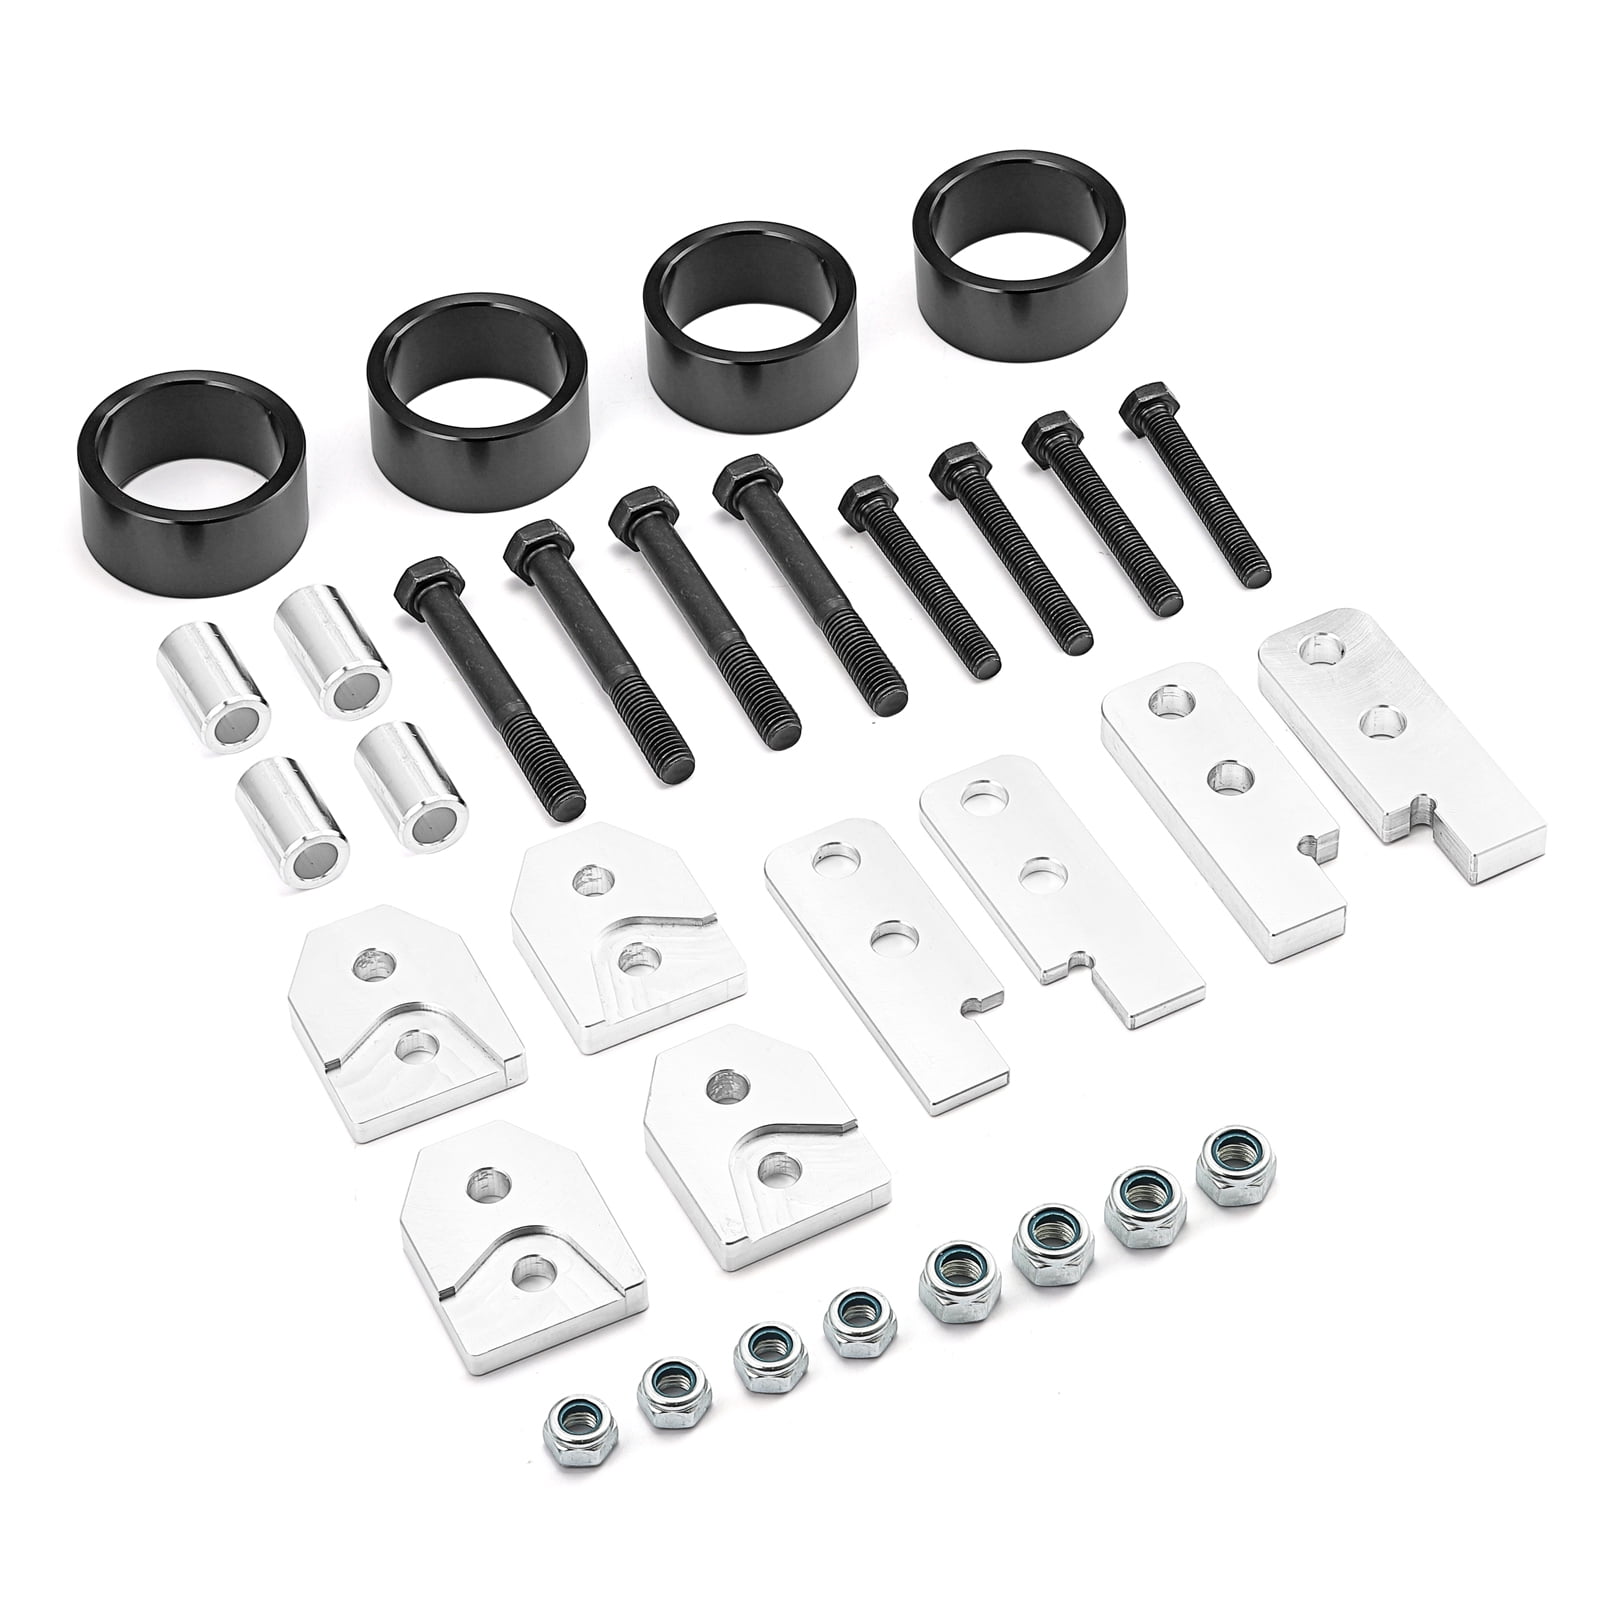 WeiSen 4 Full Front and Rear Lift Kit Fit Yamaha Rhino 450 660 700 